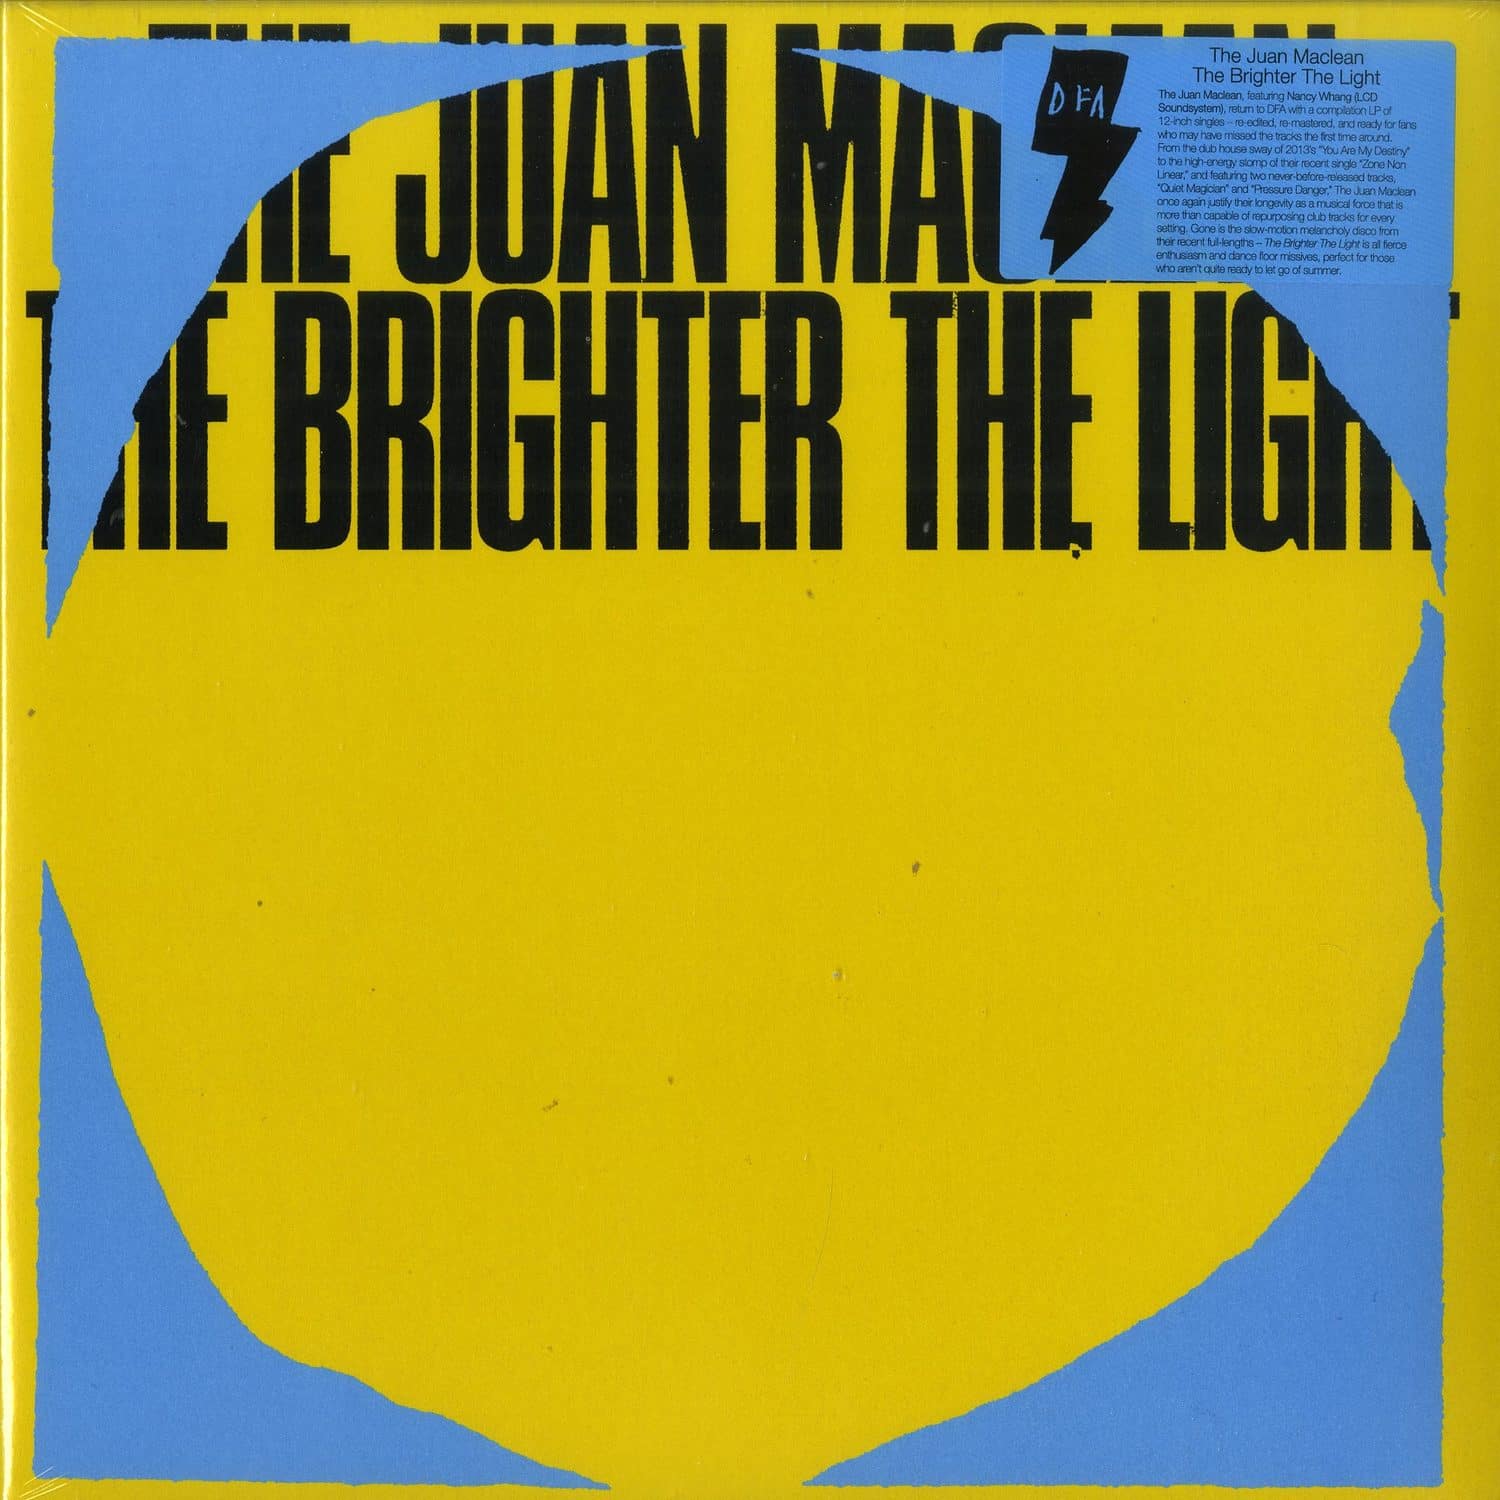 The Juan MacLean - THE BRIGHTER THE LIGHT 